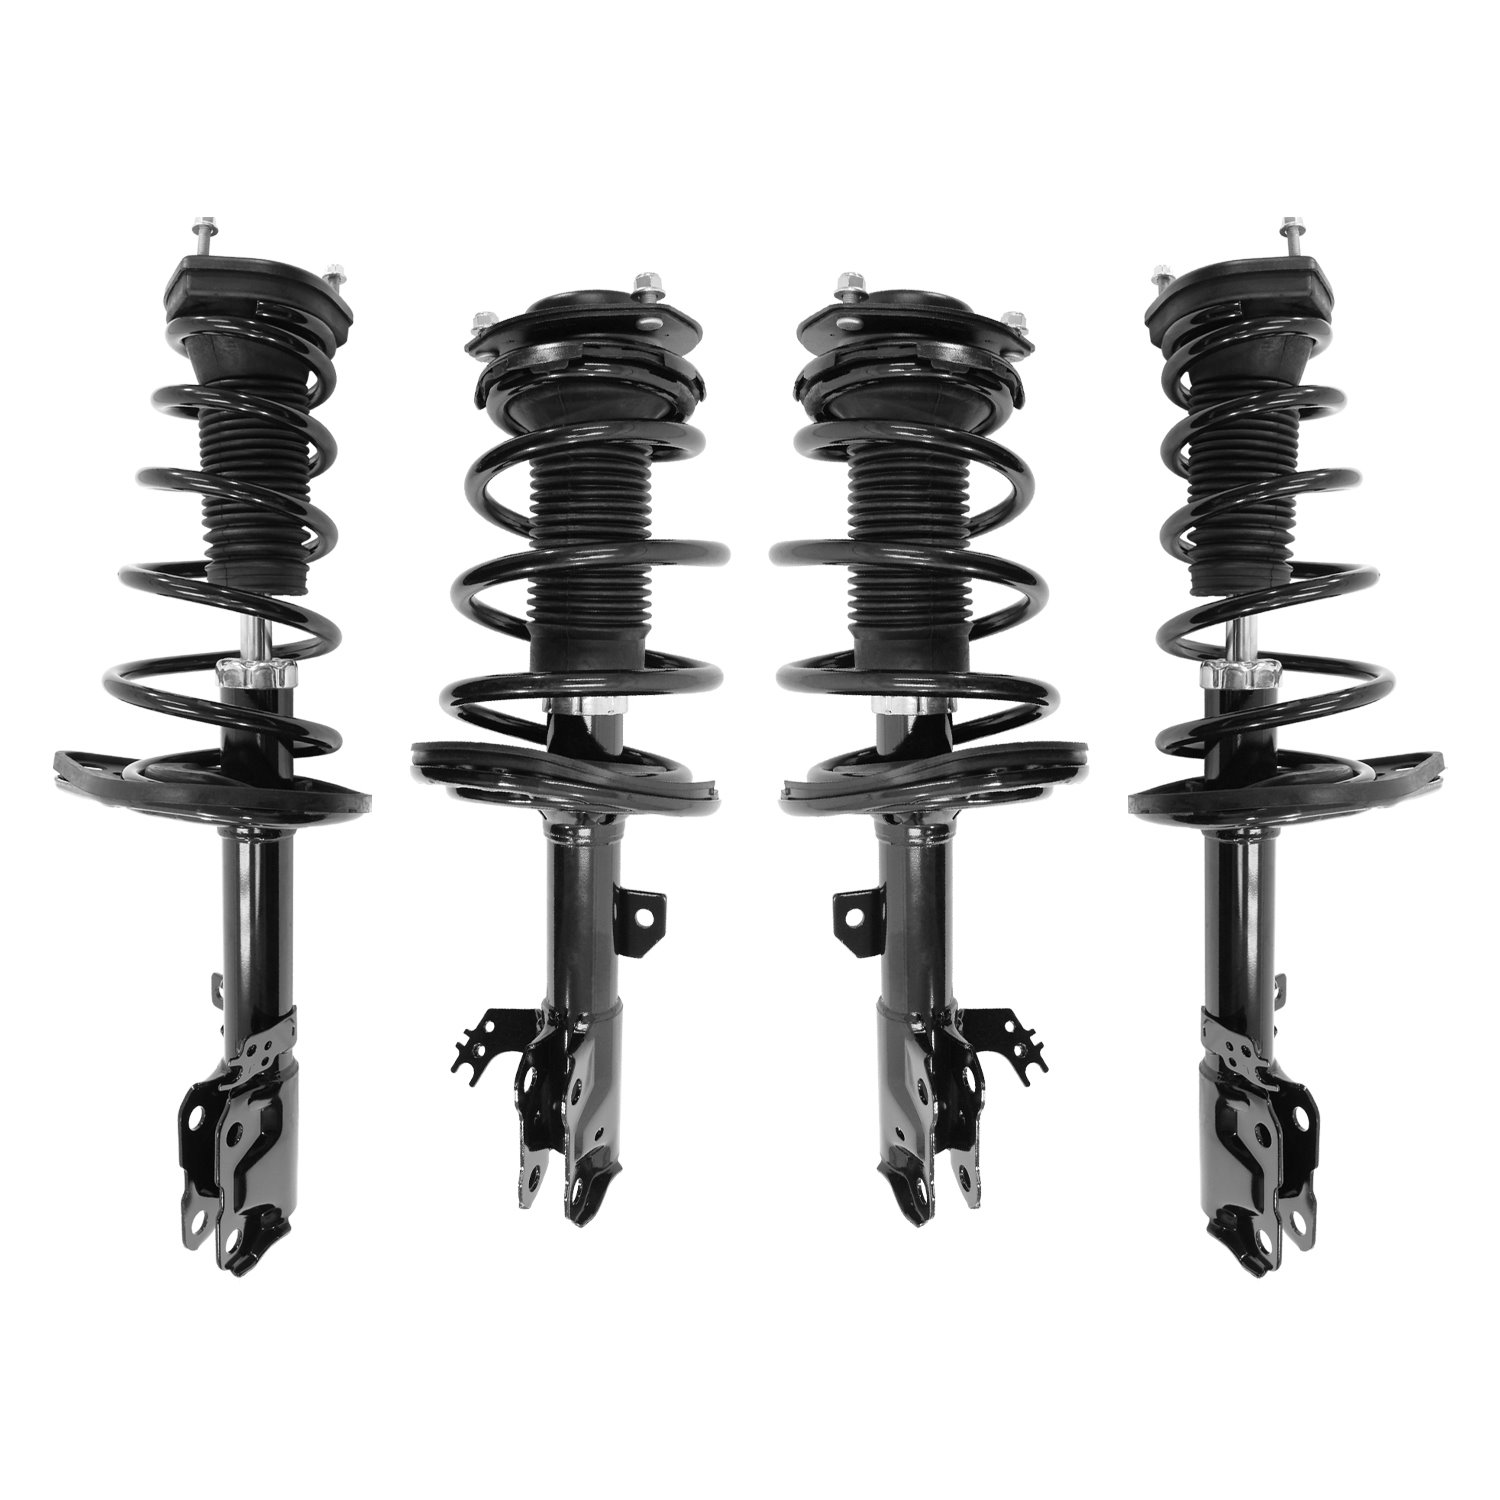 4-13281-16083-001 Front & Rear Suspension Strut & Coil Spring Assembly Kit Fits Select Toyota Avalon